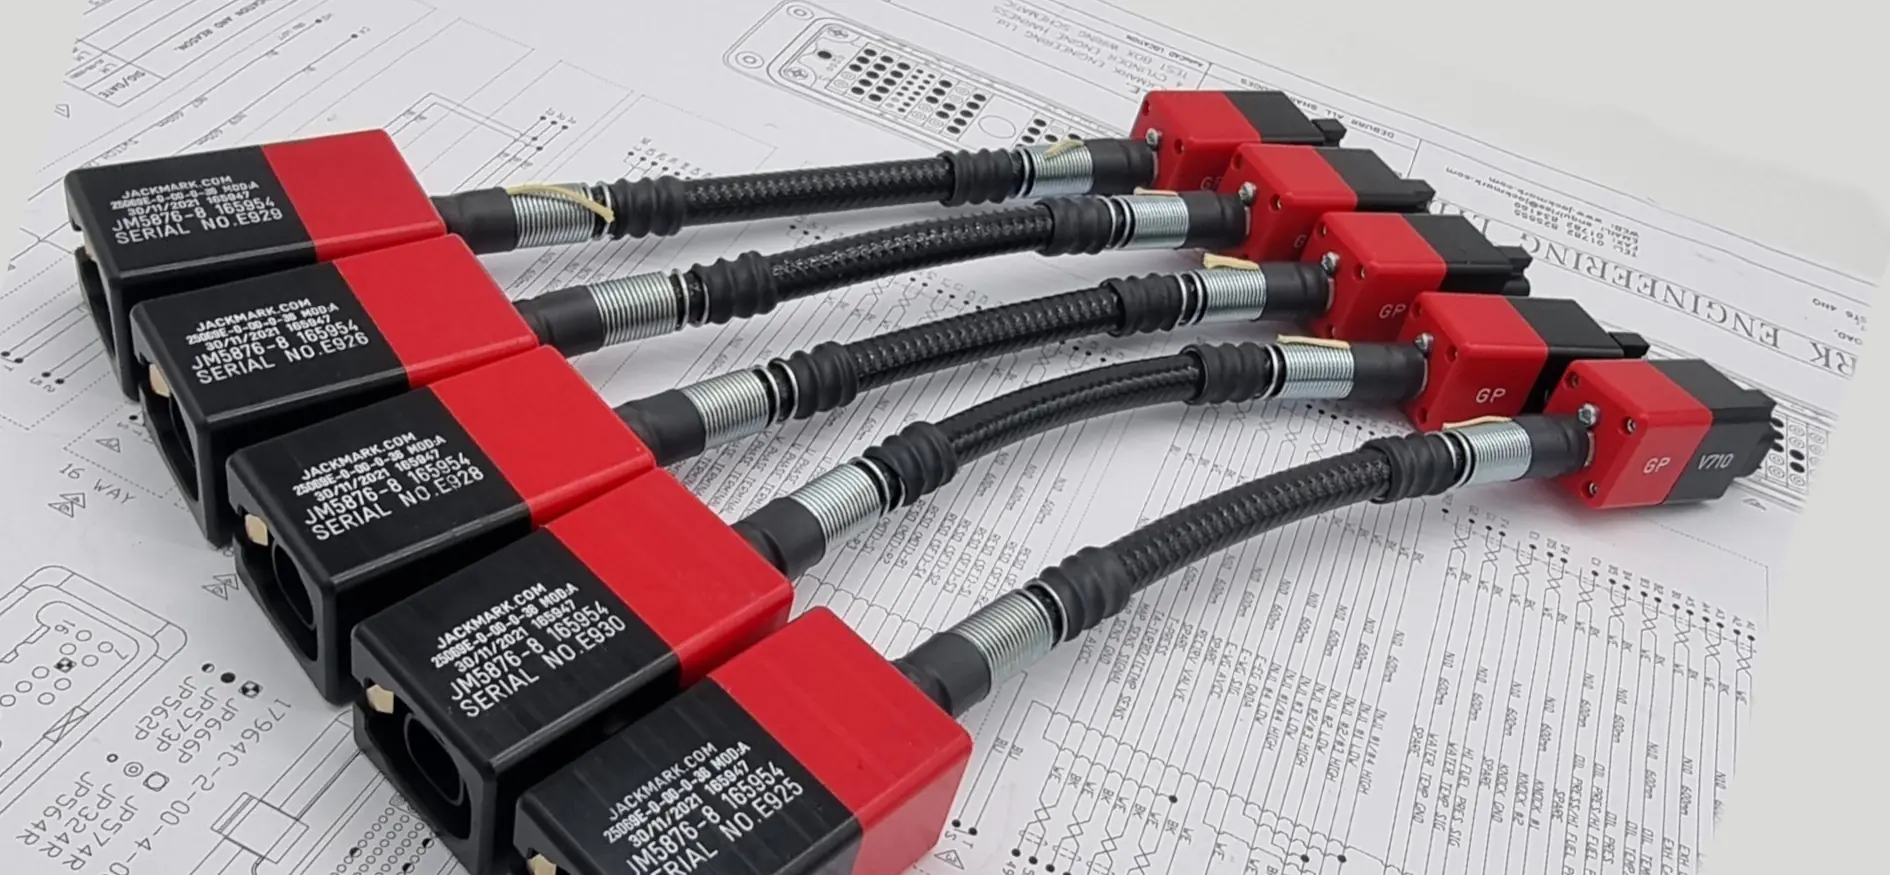 Five red rugged connectors with test leads on a schematic background